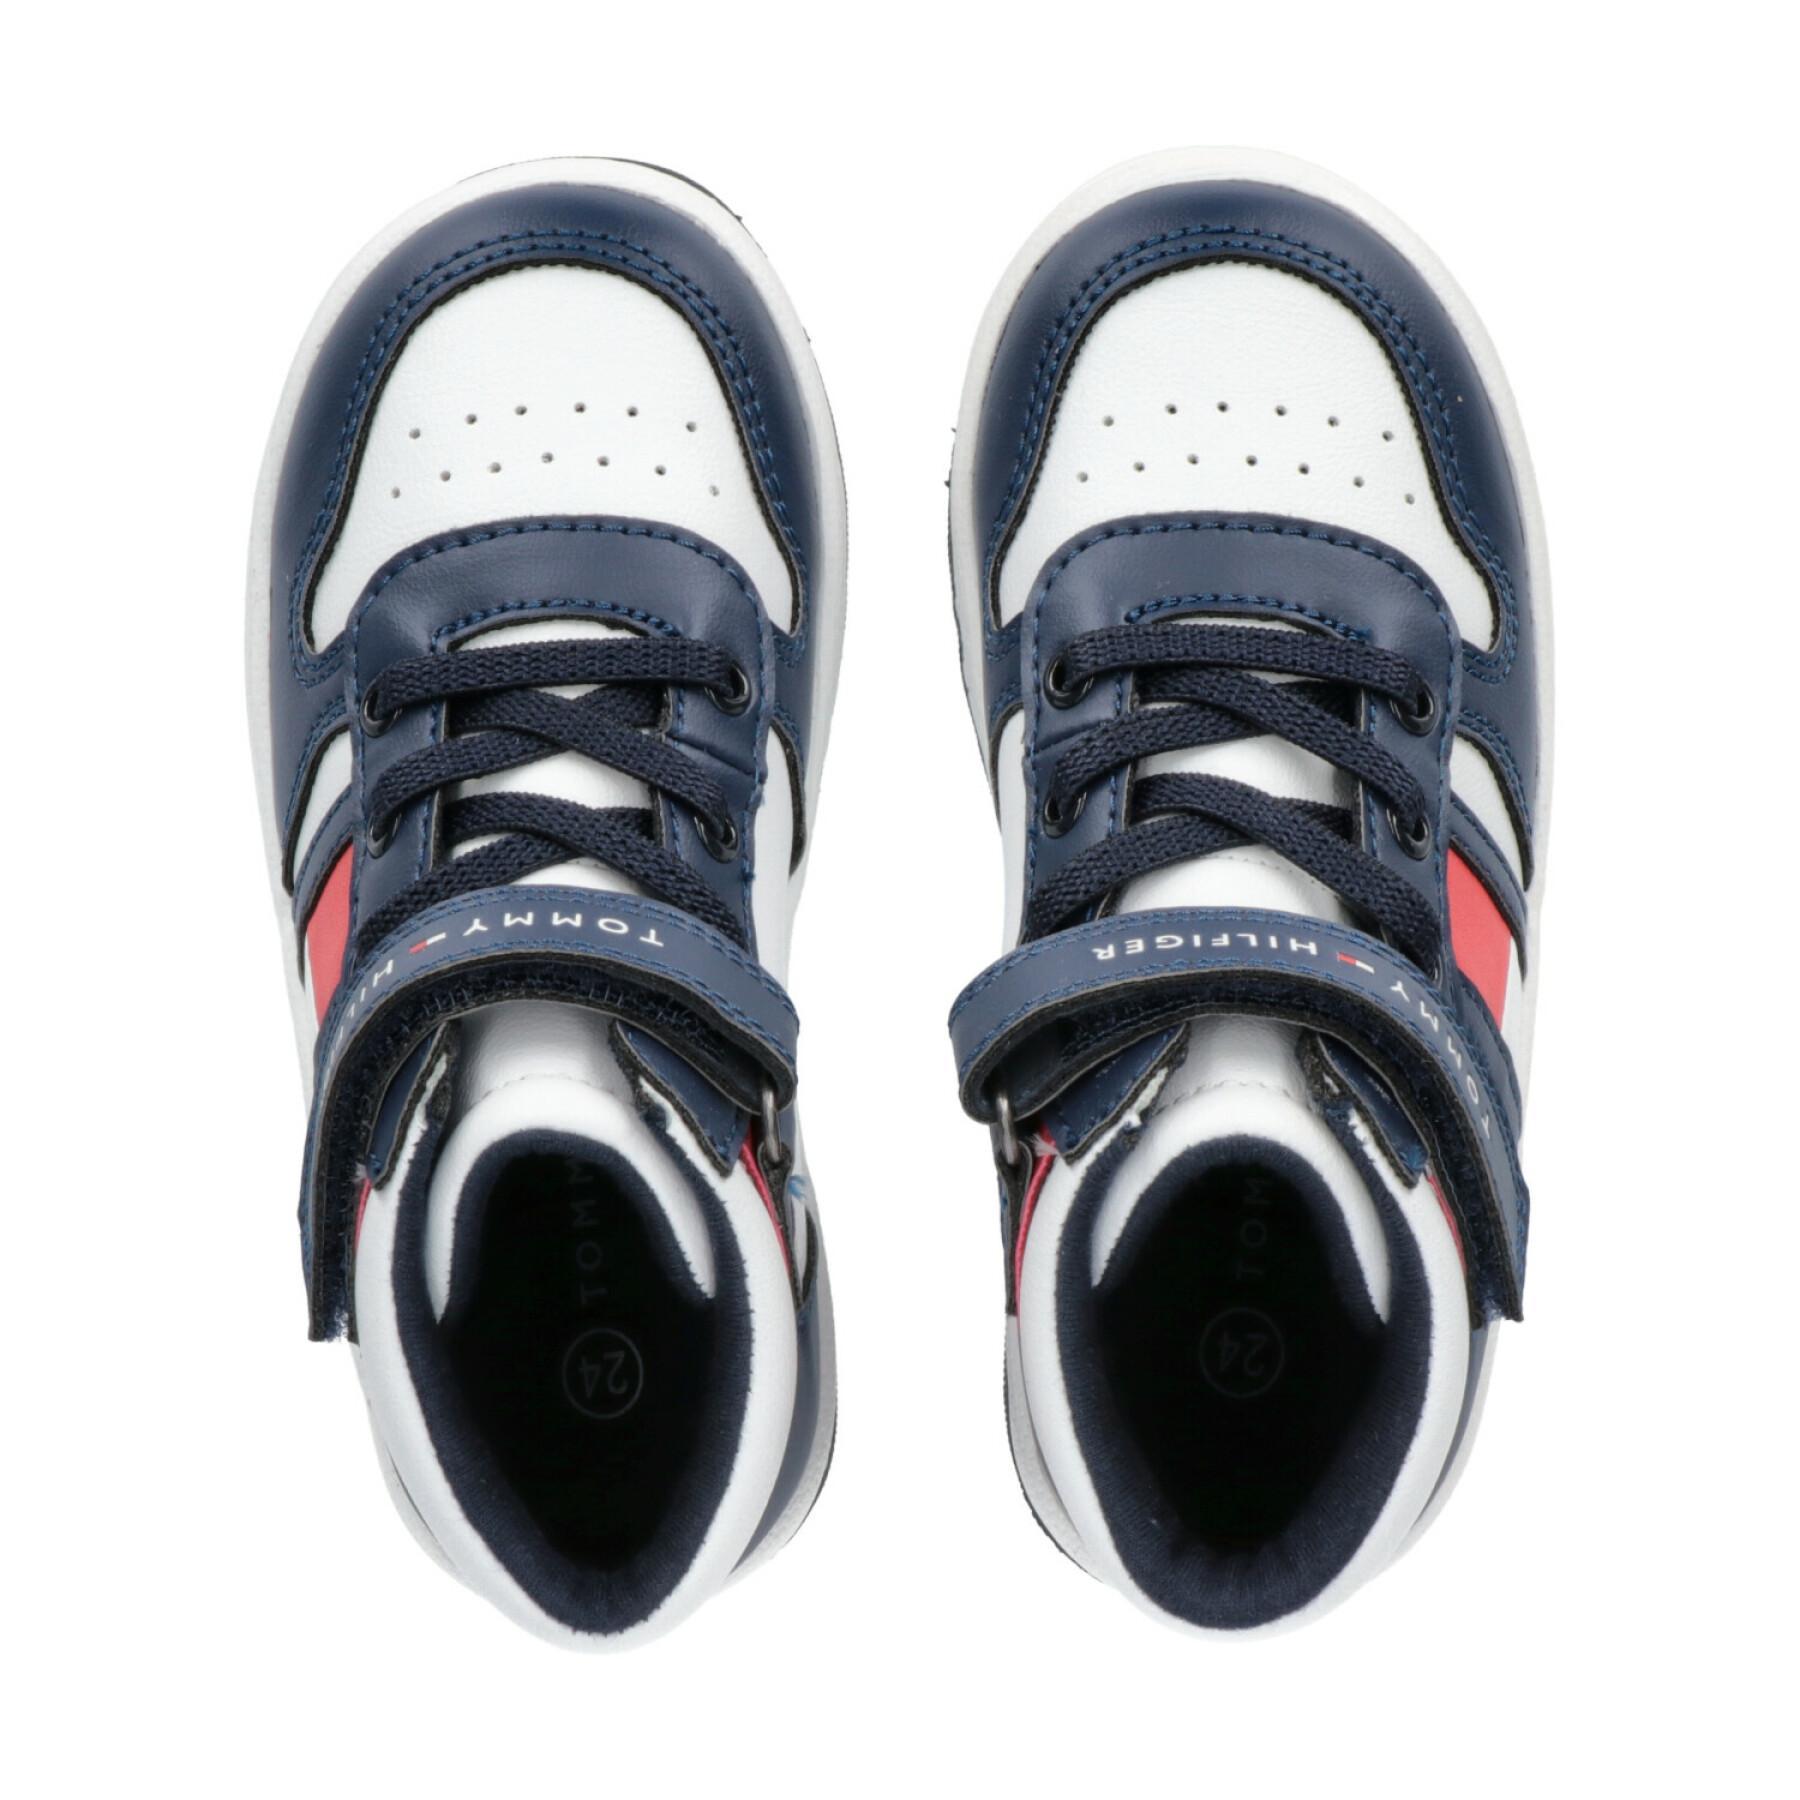 Children's sneakers Tommy Hilfiger